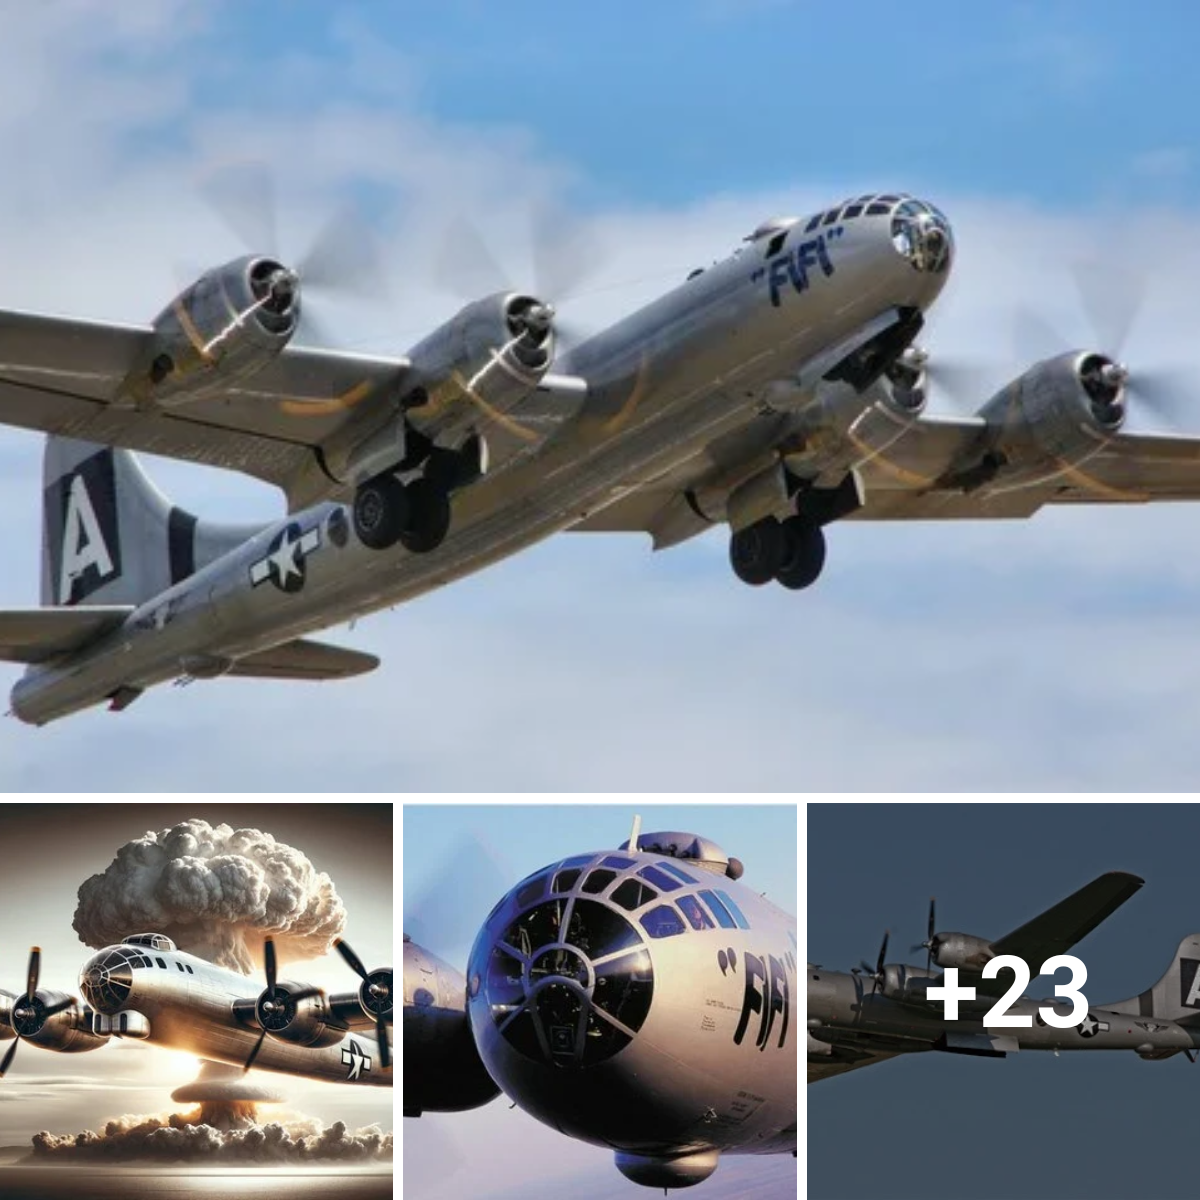 With its sturdy construction and potent engines, the Boeing B17 is a formidable opponent.